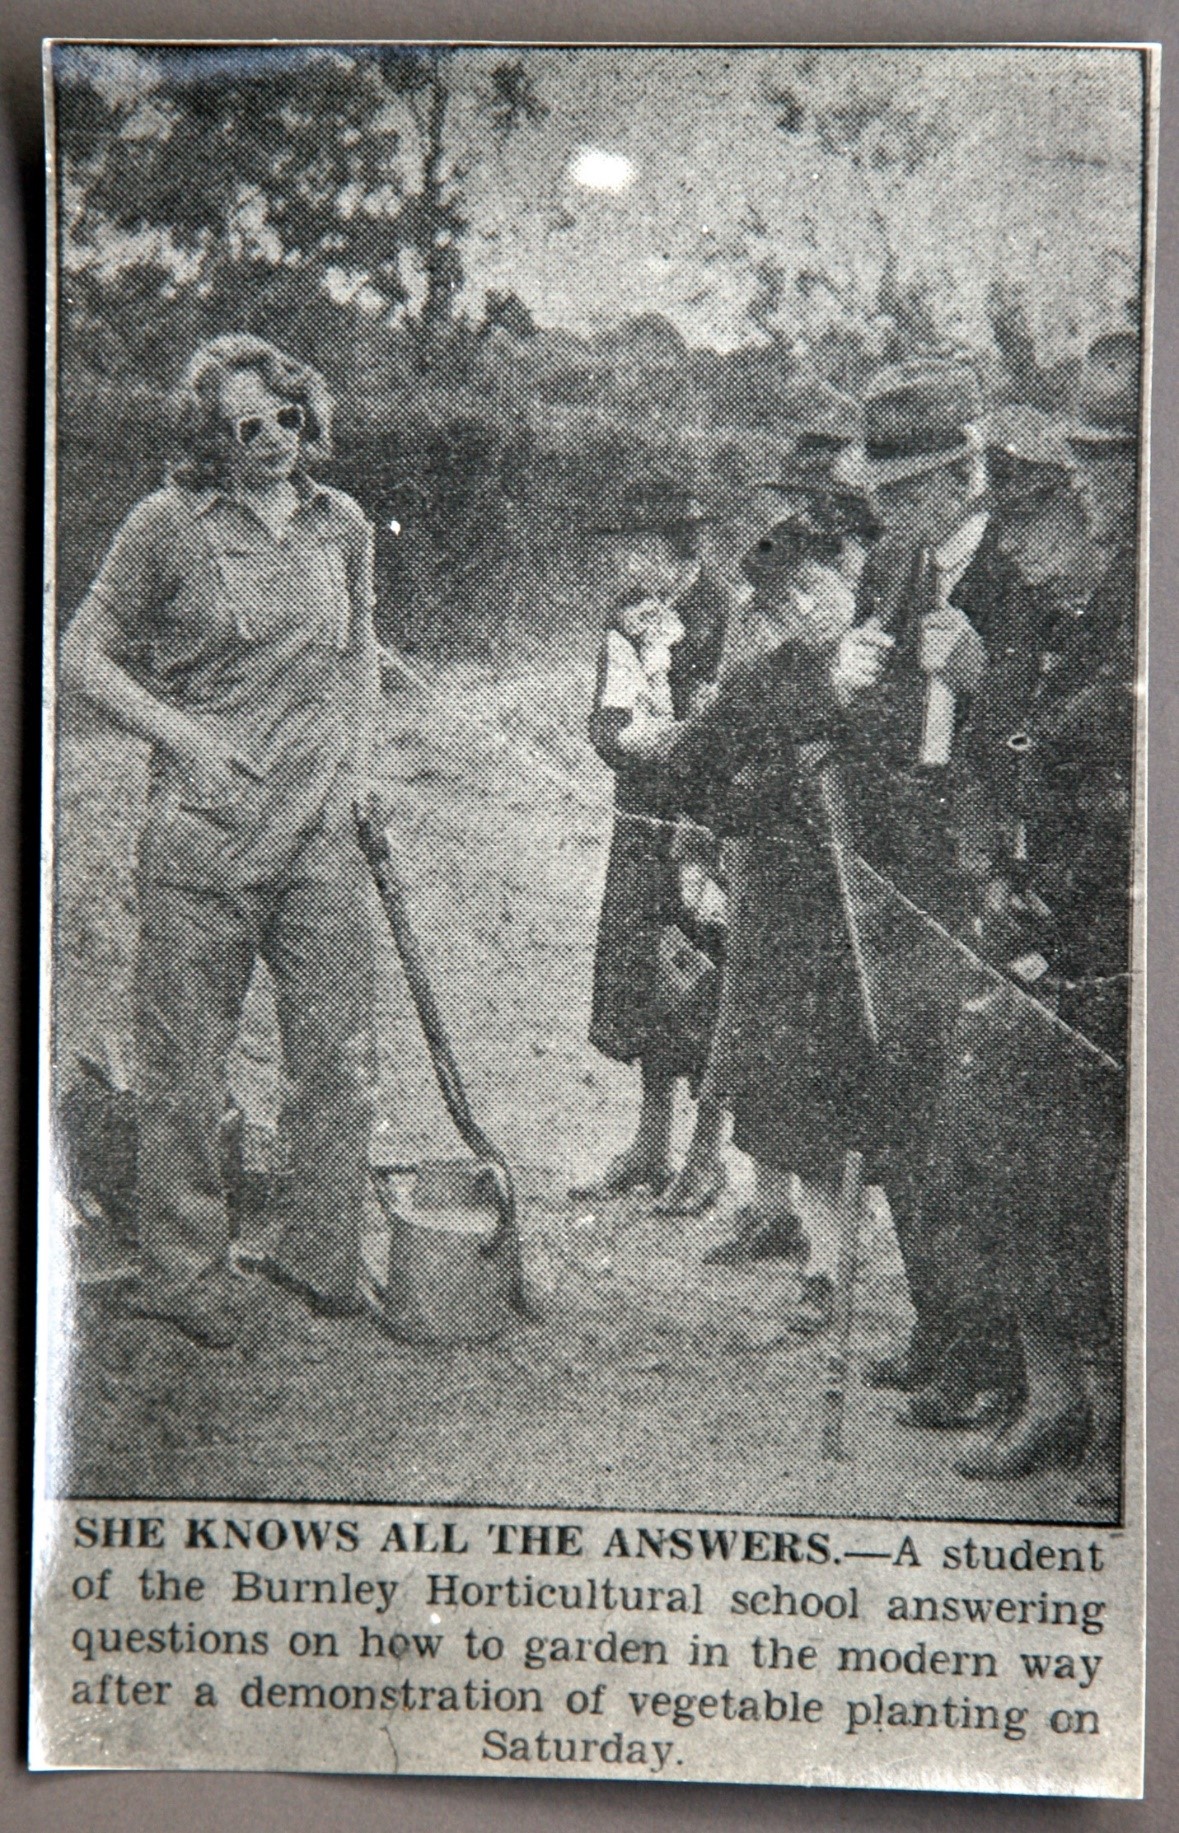 A newspaper clipping of a trendy looking woman in sunglasses and overalls demonstrating to a group of people dressed in long formal coats and hats. Caption reads: "She knows all the answers - A student of the Burnley Horticultural school answering questions on how to garden in the modern way after a demonstration of vegetable planting on Saturday.